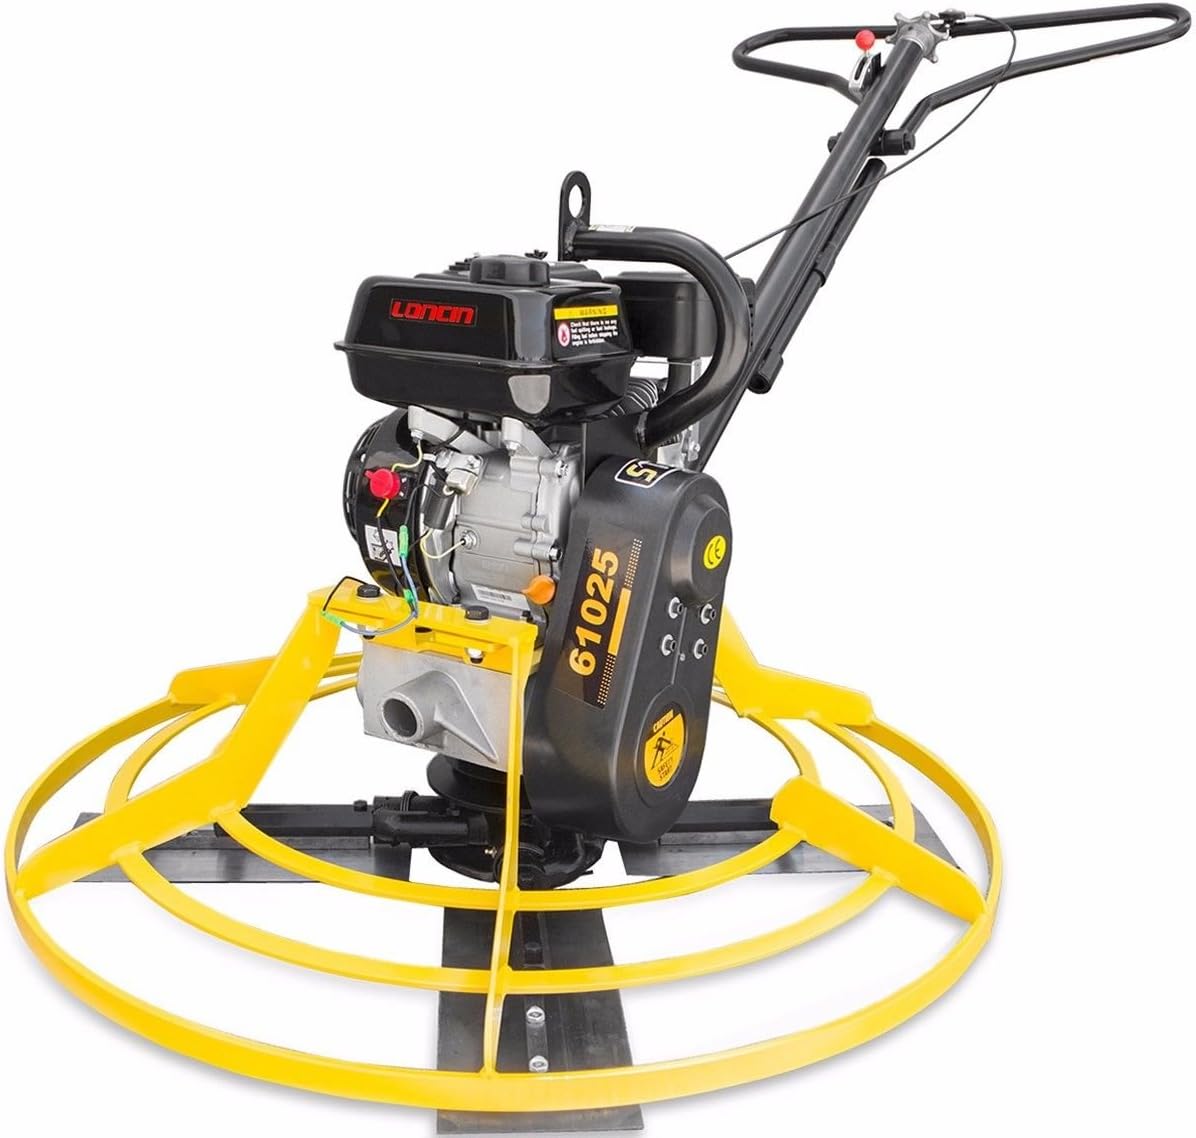 Stark USA 61025 Gas-Powered Concrete Finisher: High-Performance Solution for Perfect Finish